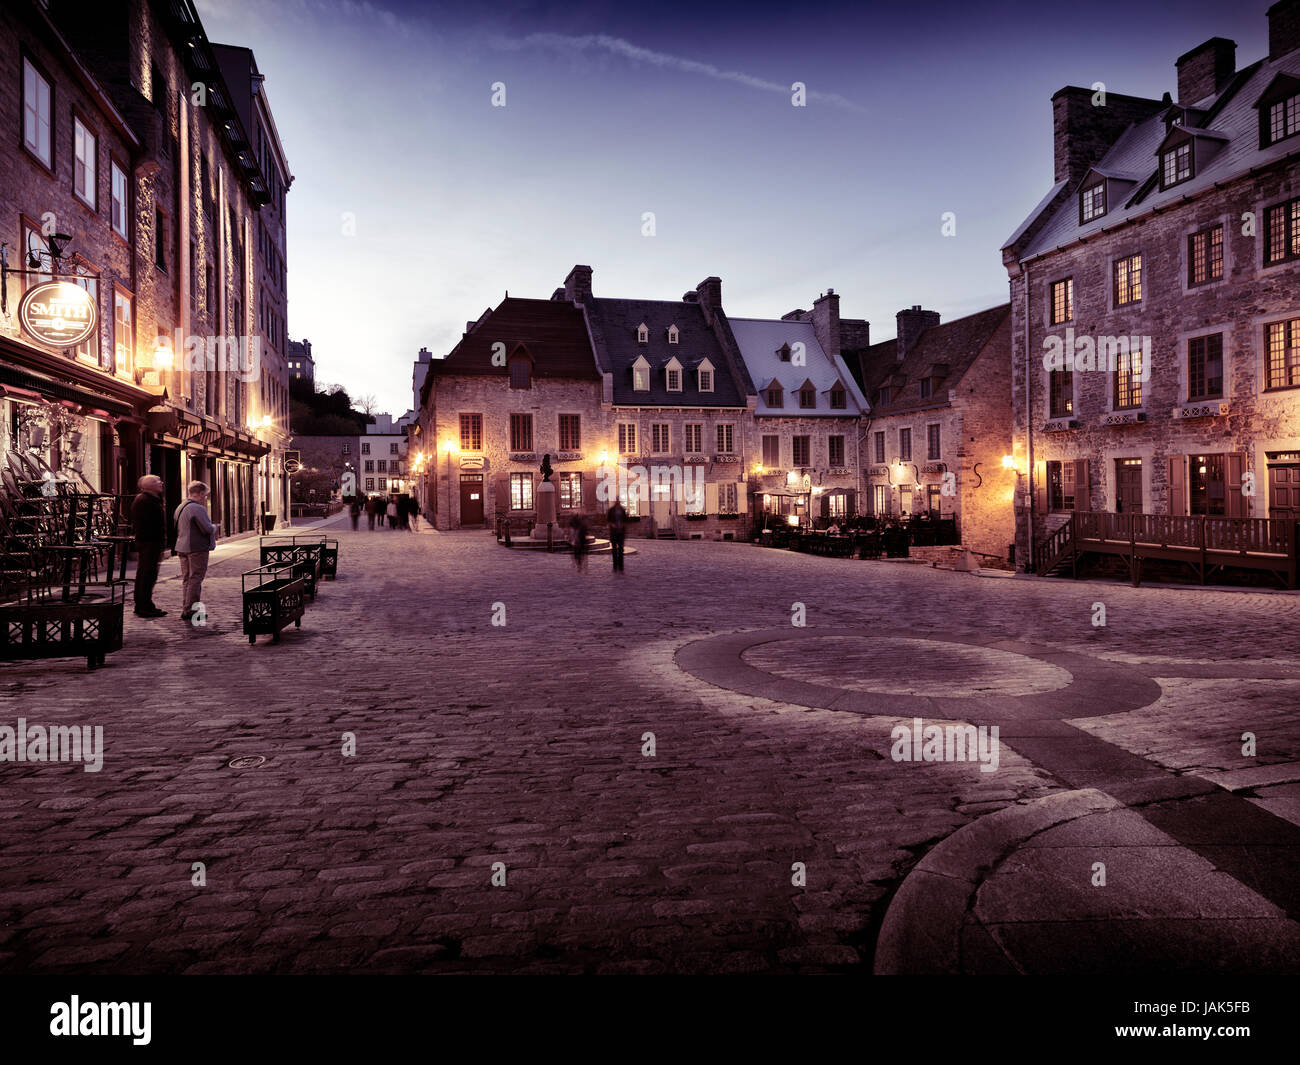 Nighttime view of Place Royale, Royal Square with boutiques and restaurants. Old Quebec City. Quebec, Canada. Ville de QuÃ©bec. Stock Photo